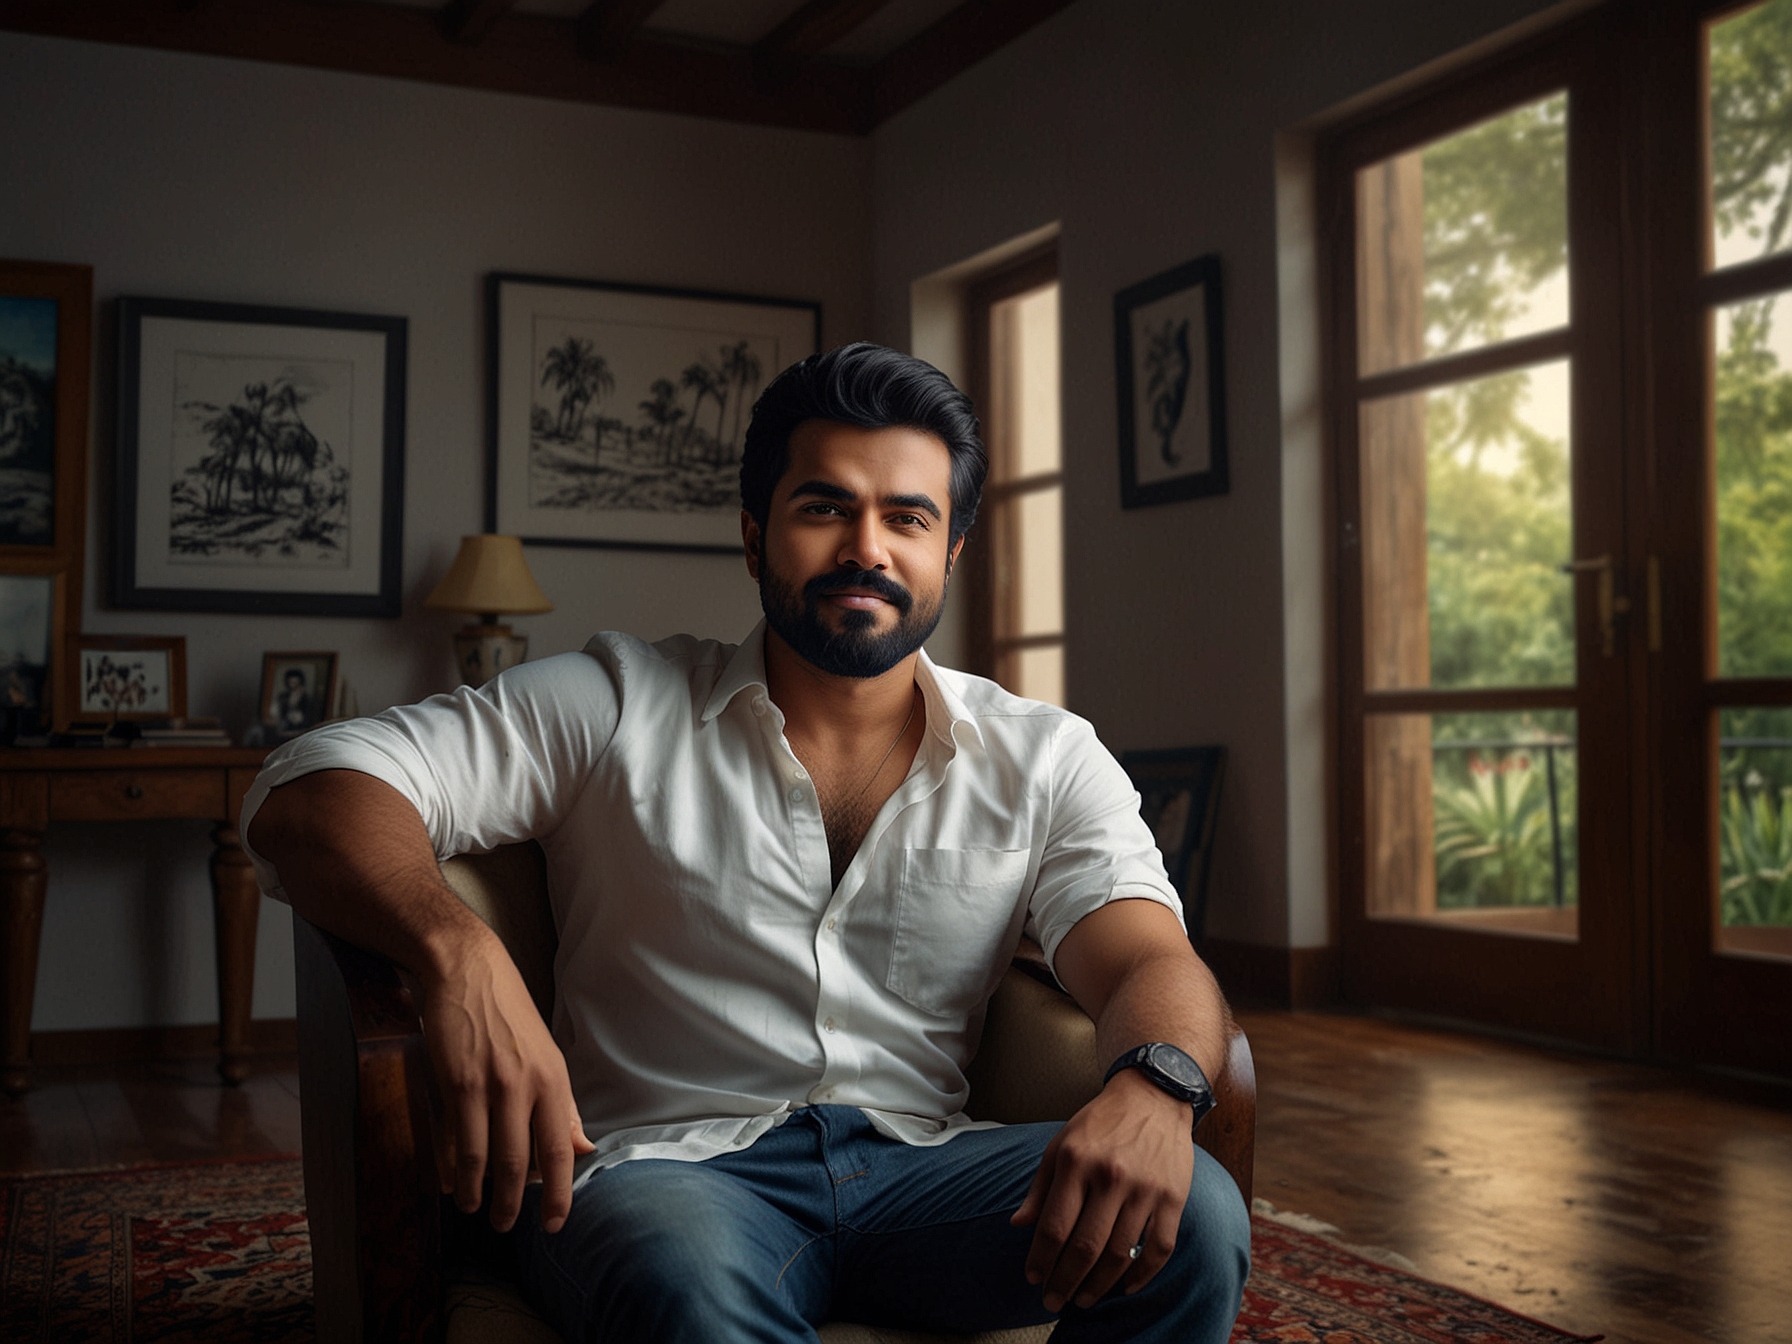 Ram Charan, in his home, enjoying a moment of solitude and reflection shortly after the success of 'RRR.' The setting is relaxed, highlighting the actor's need for introspection.